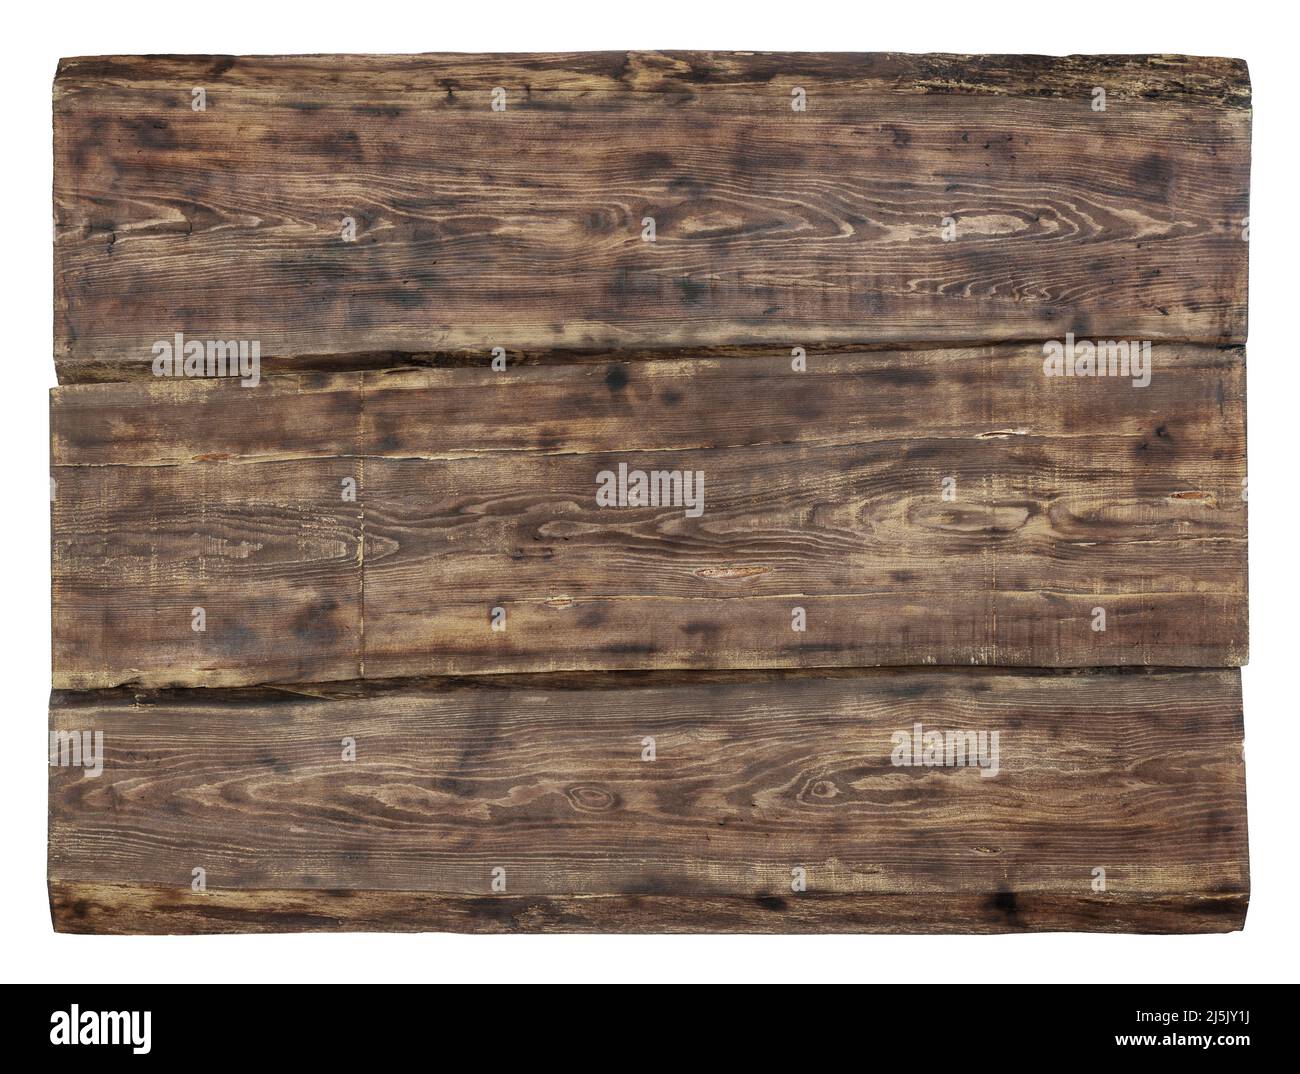 Old wooden board plank isolated on white background Stock Photo